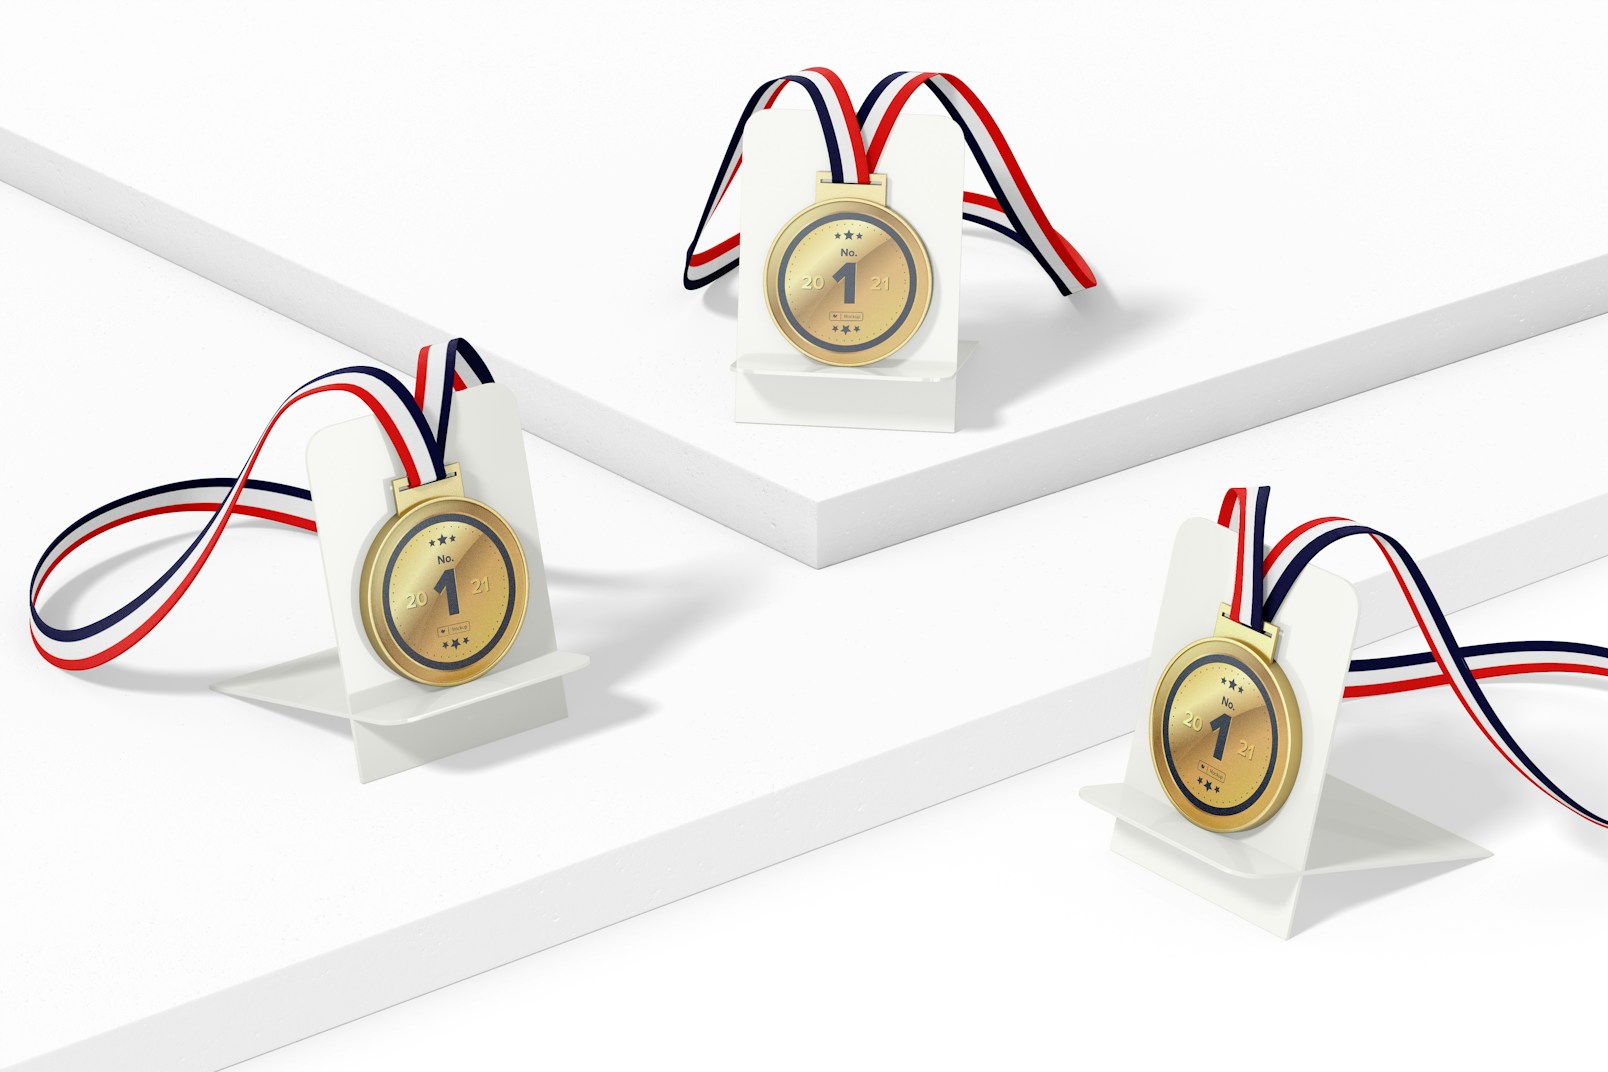 Round Competition Medals with Ribbon Set Mockup